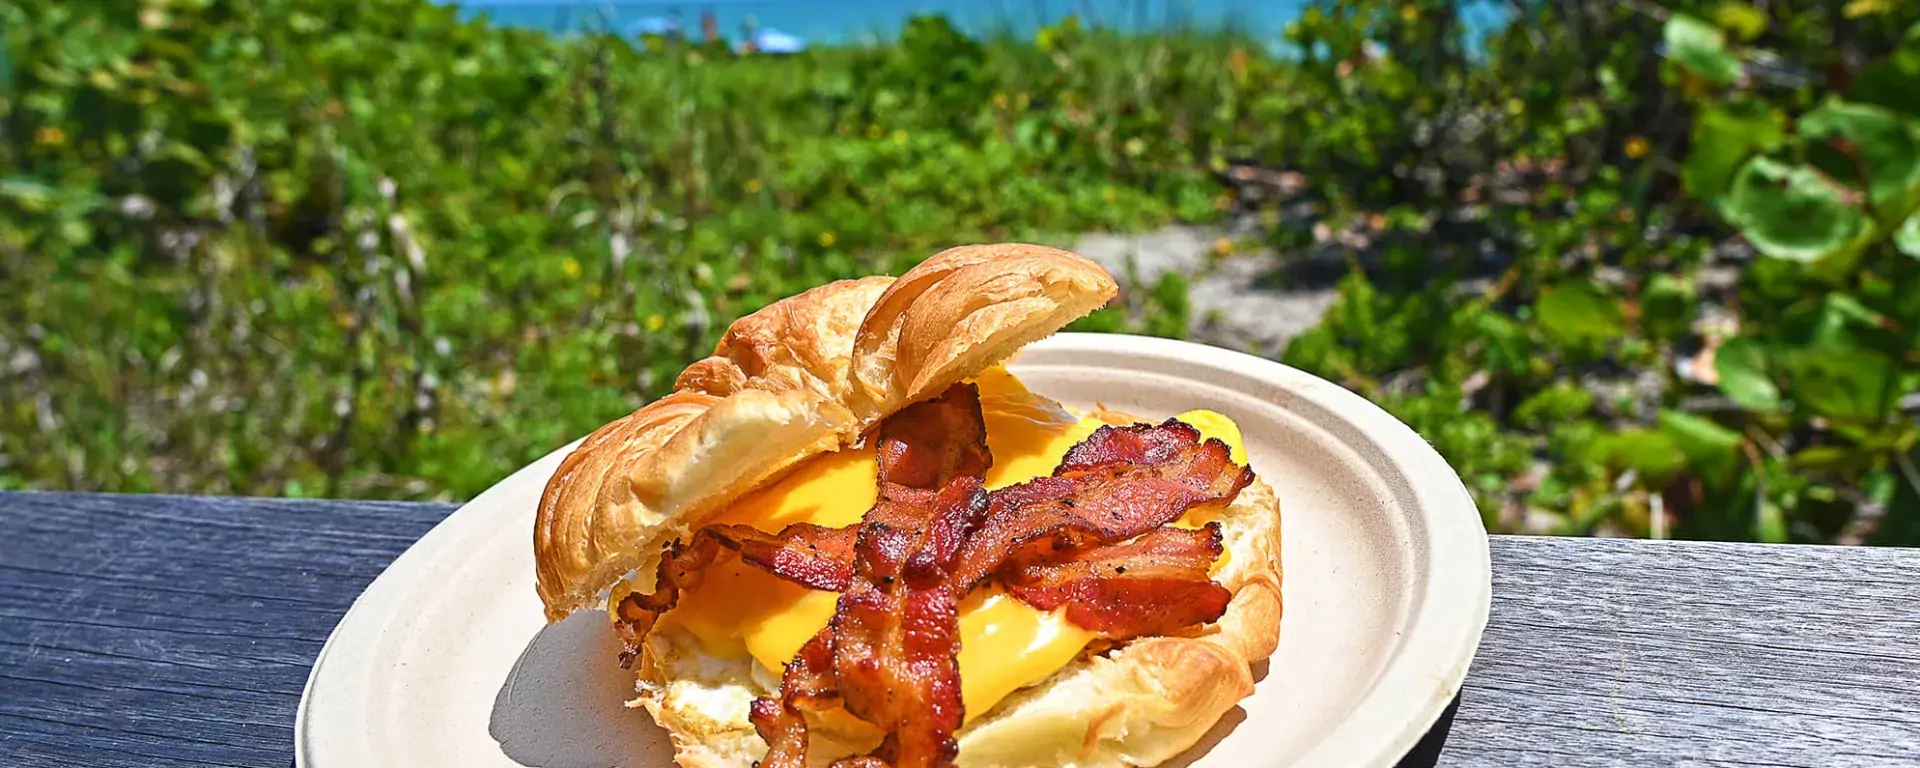 Image of a bacon, egg, and cheese breakfast sandwich on a croissant served at Sand Dune Café in Jensen Beach, FL.  